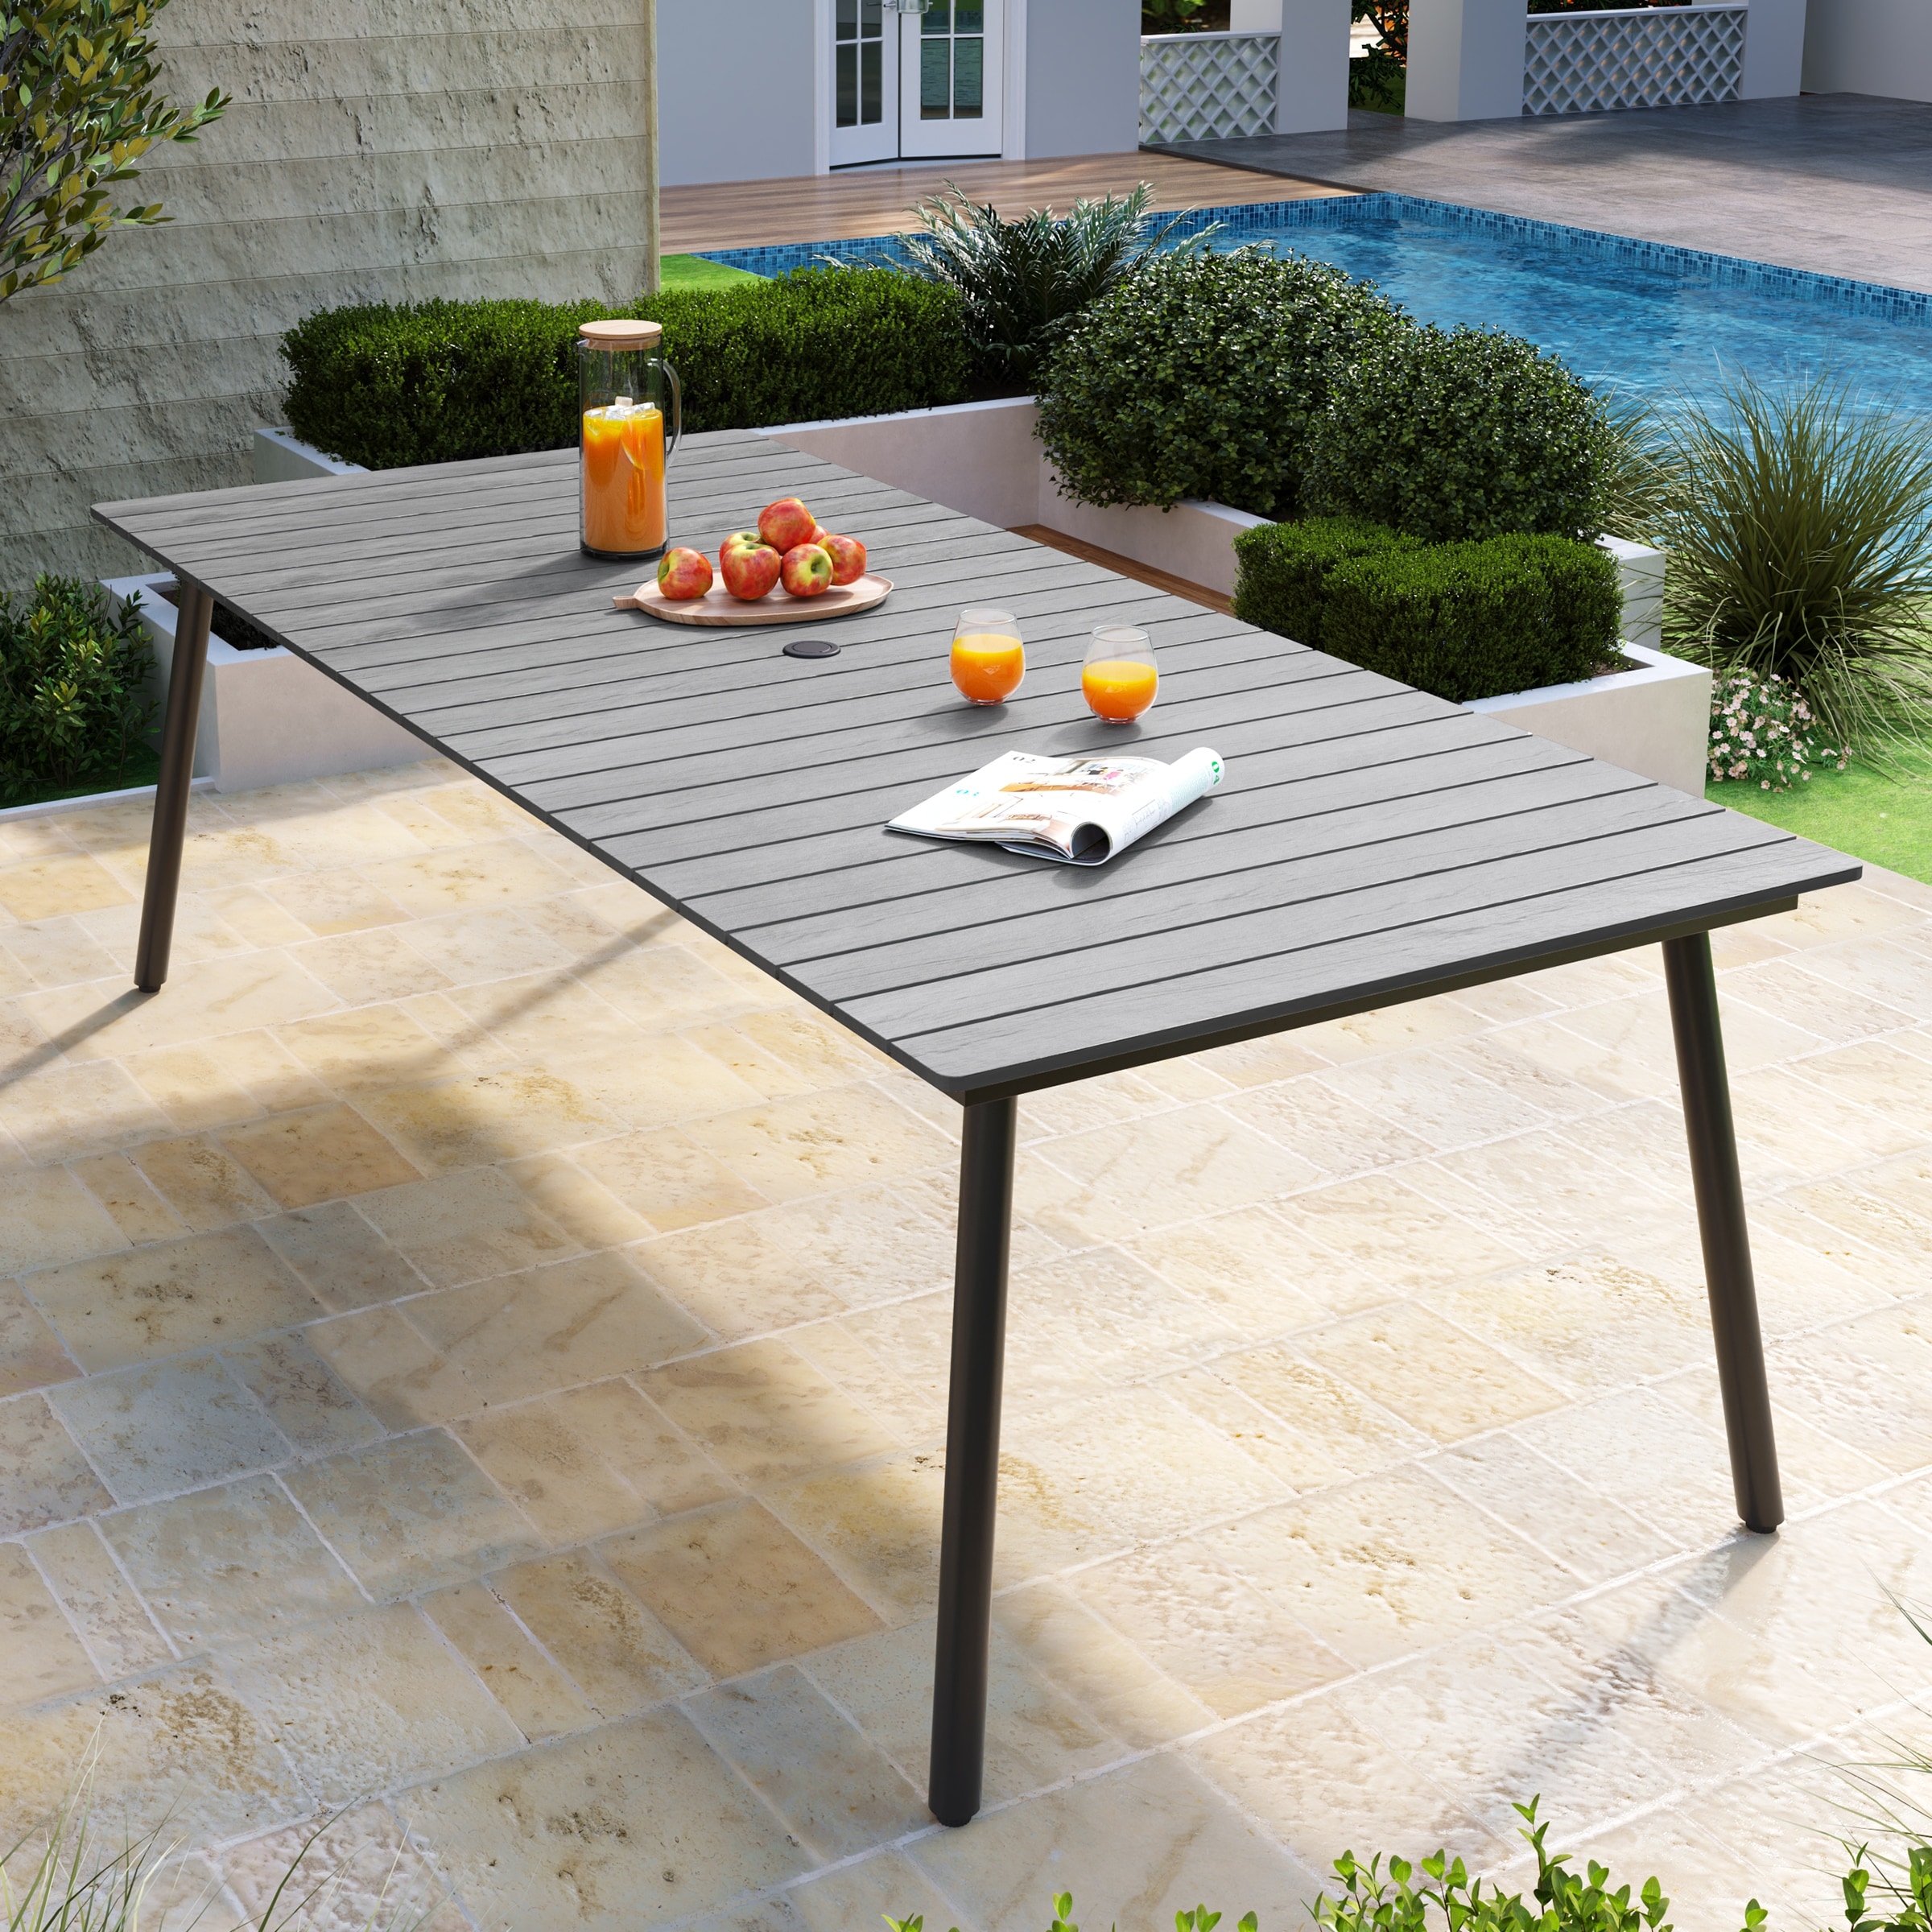 Pellebant Outdoor Rectangle Aluminum Dining Table with Umbrella